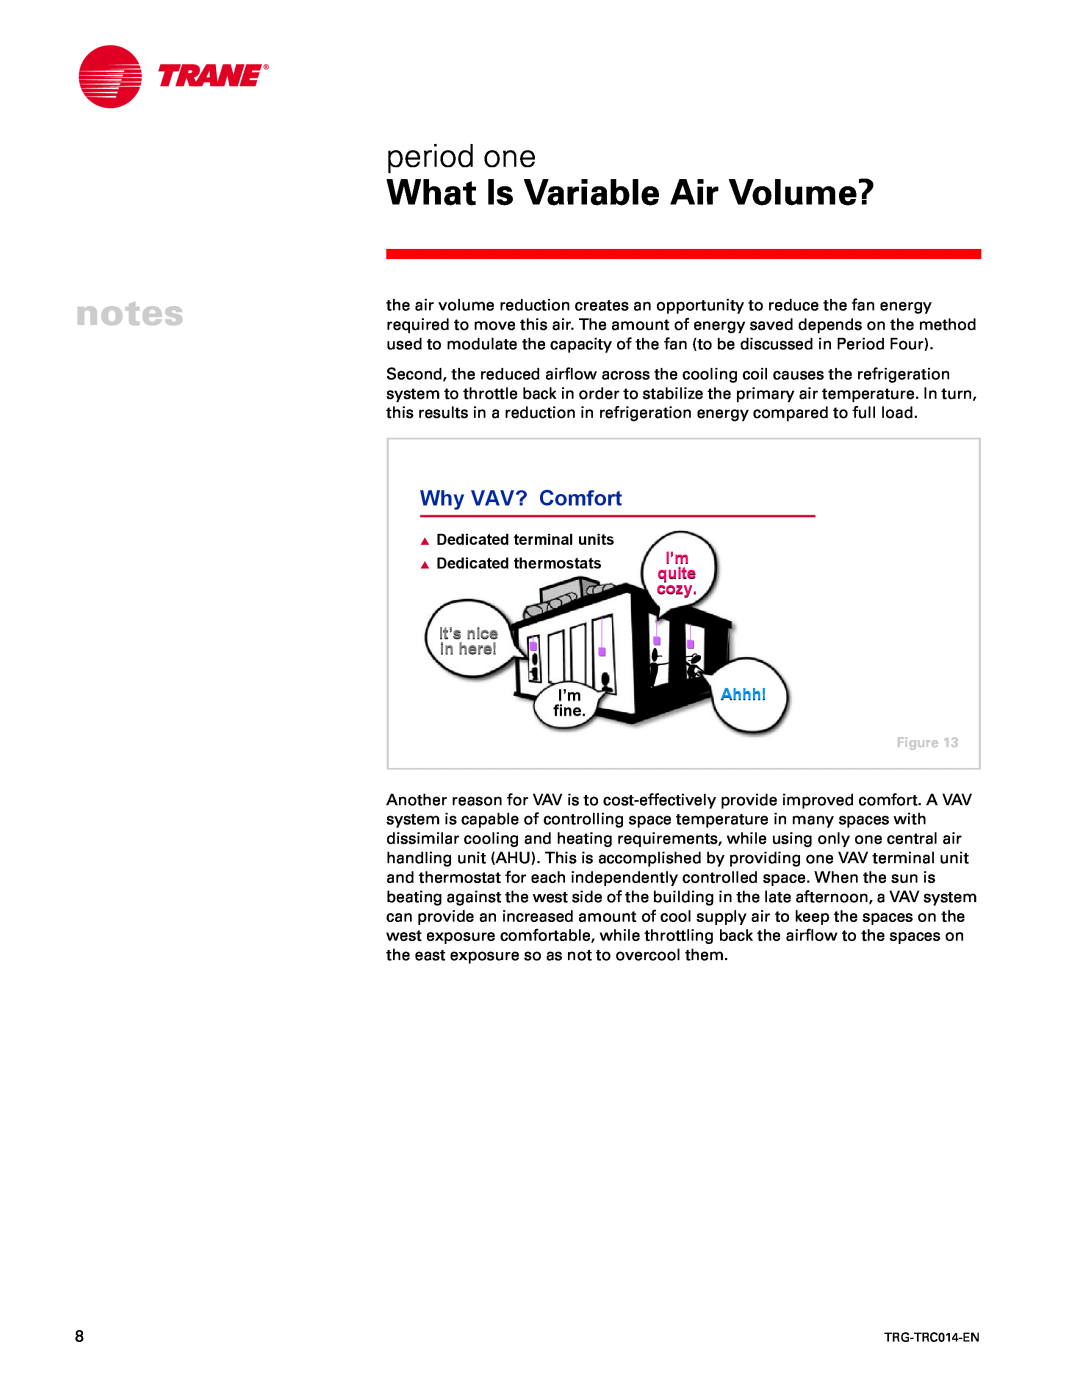 Trane TRG-TRC014-EN Why VAV? Comfort, What Is Variable Air Volume?, period one, quite, cozy, It’s nice, in here, Ahhh 